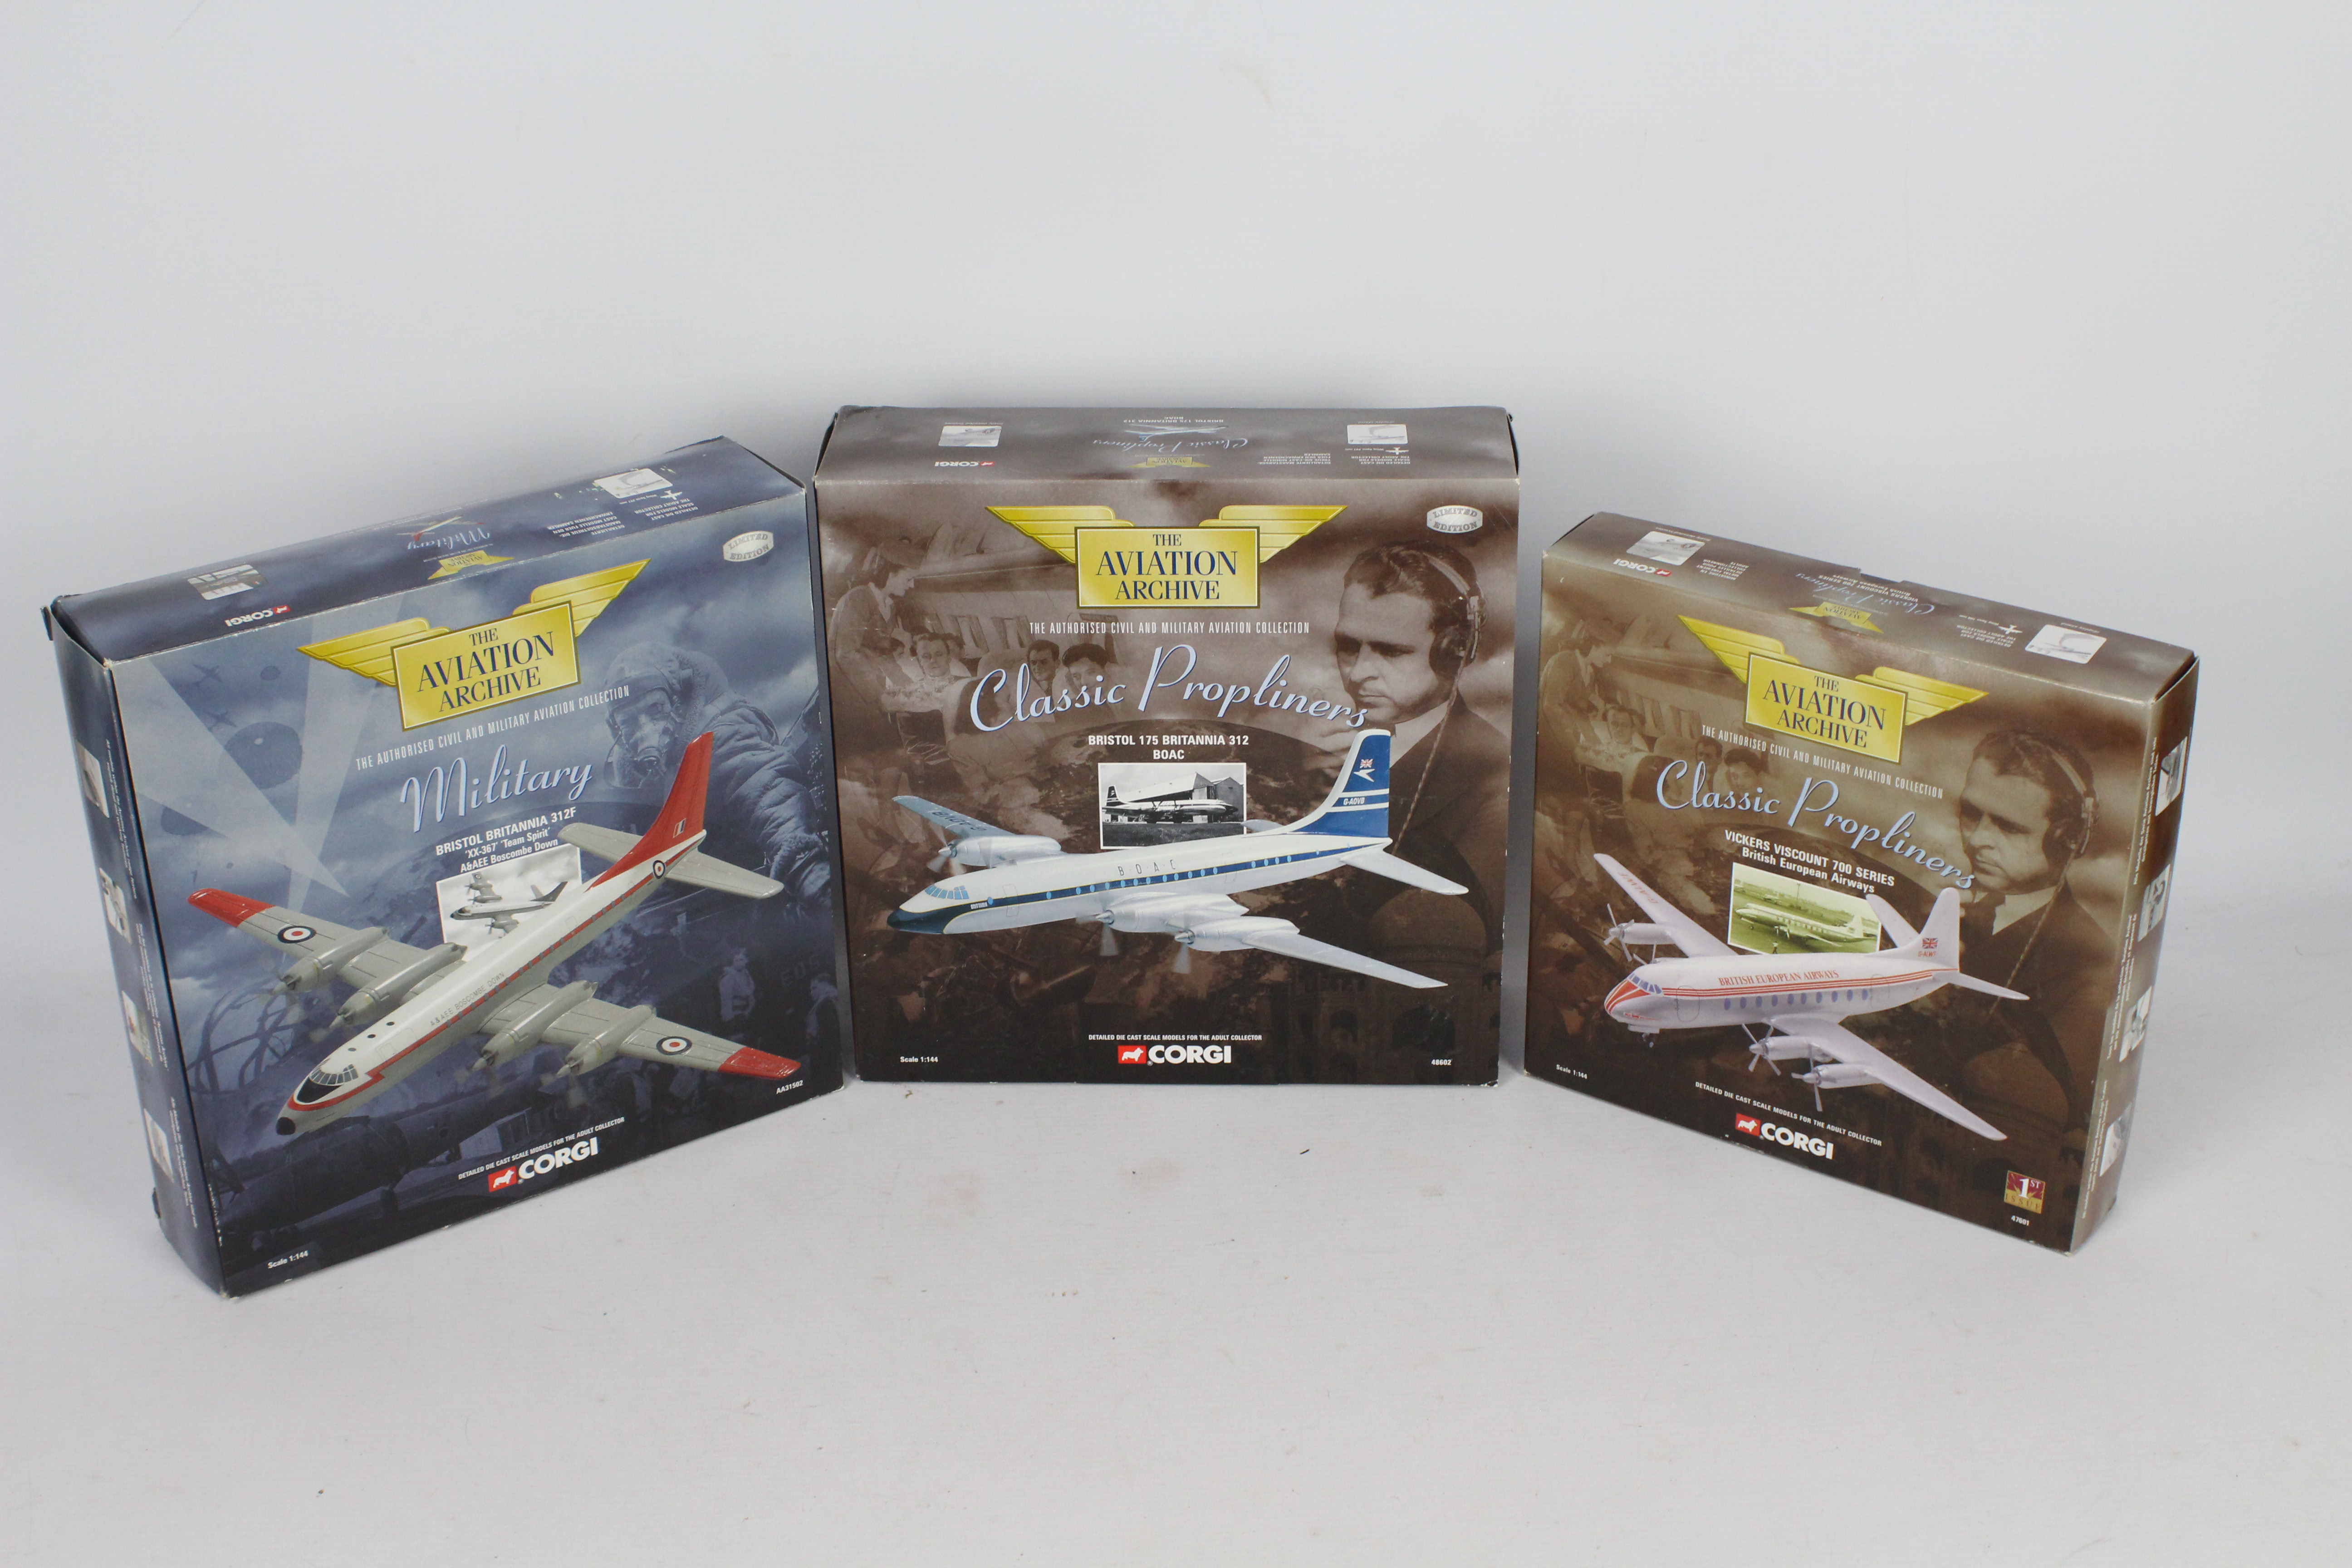 Corgi Aviation Archive - Three boxed 1:144 scale diecast model aircraft from various CAA ranges. - Image 5 of 5